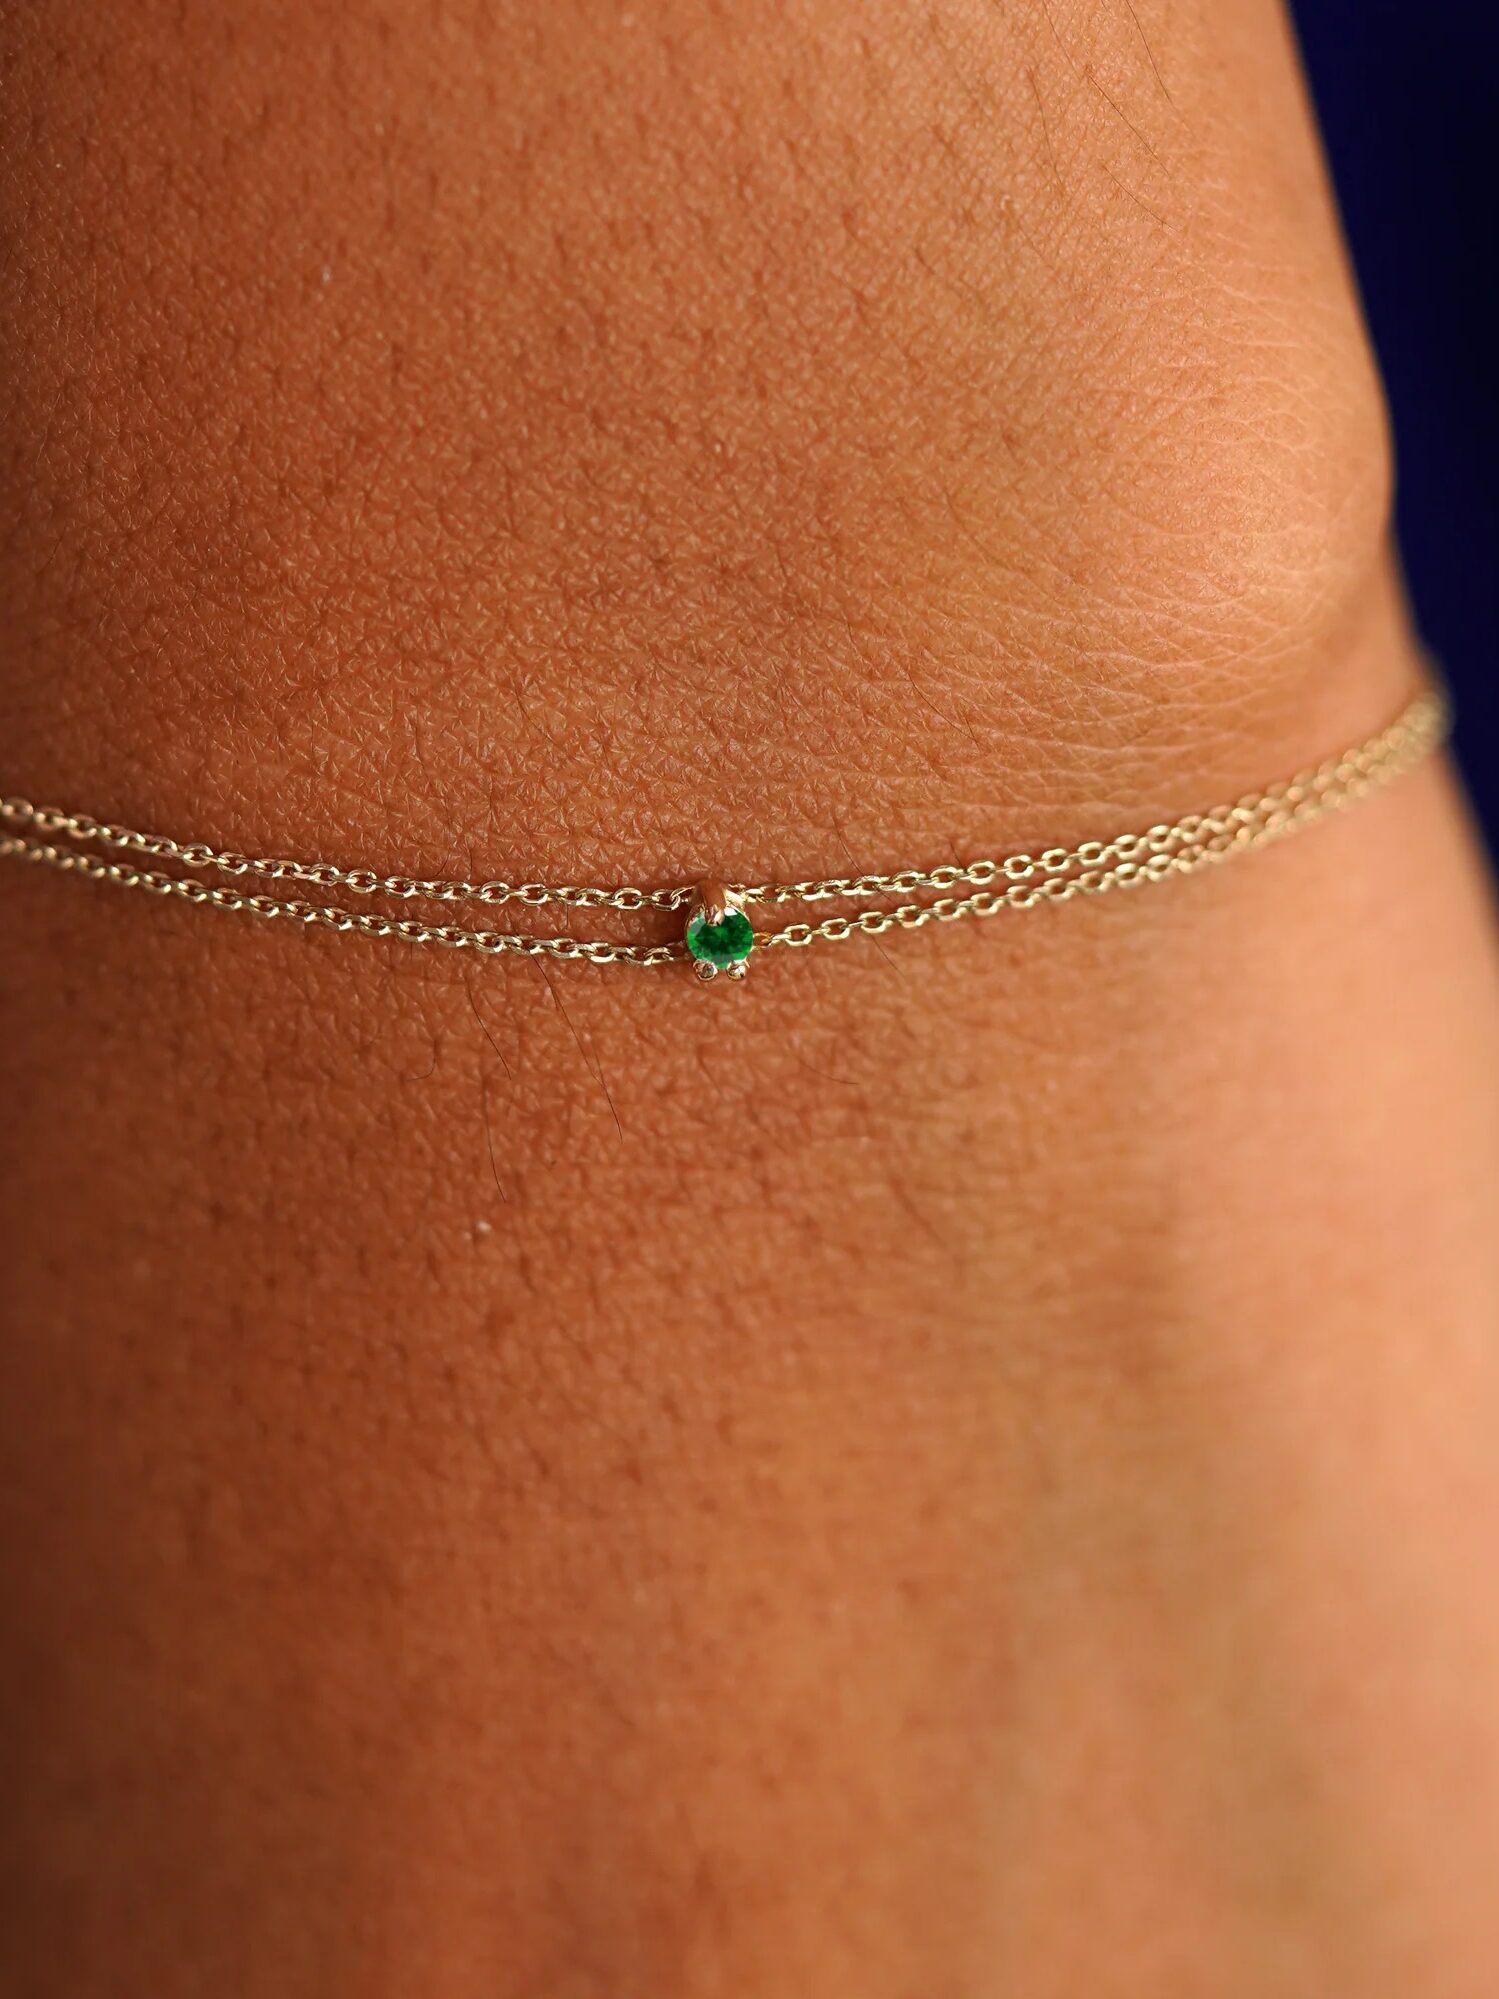 Gold bracelet with a green gemstone on a woman's wrist against a dark blue background.